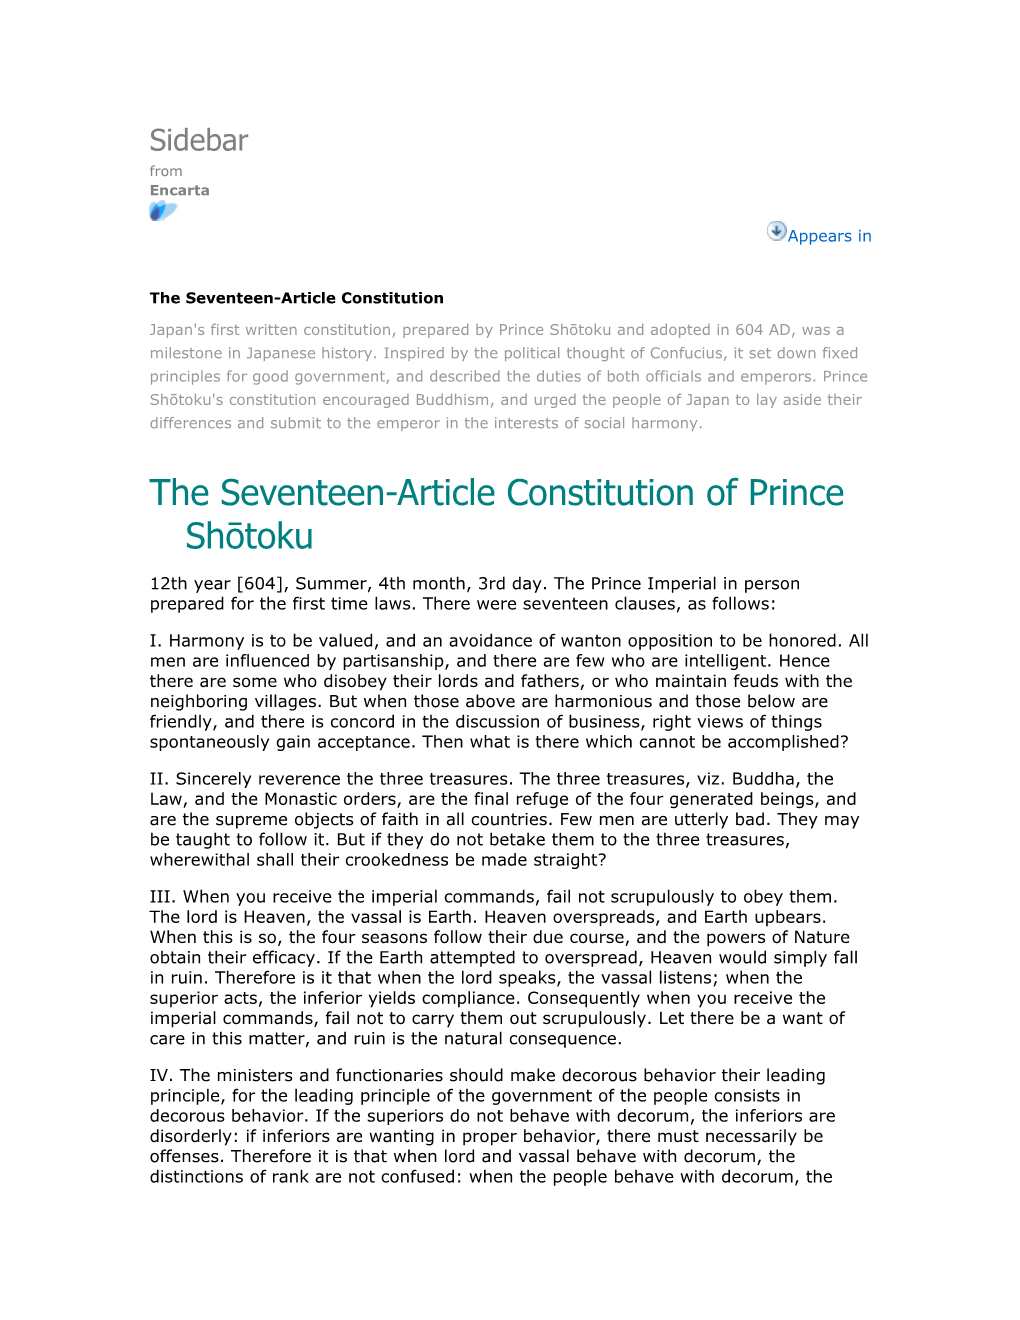 The Seventeen-Article Constitution of Prince Shōtoku